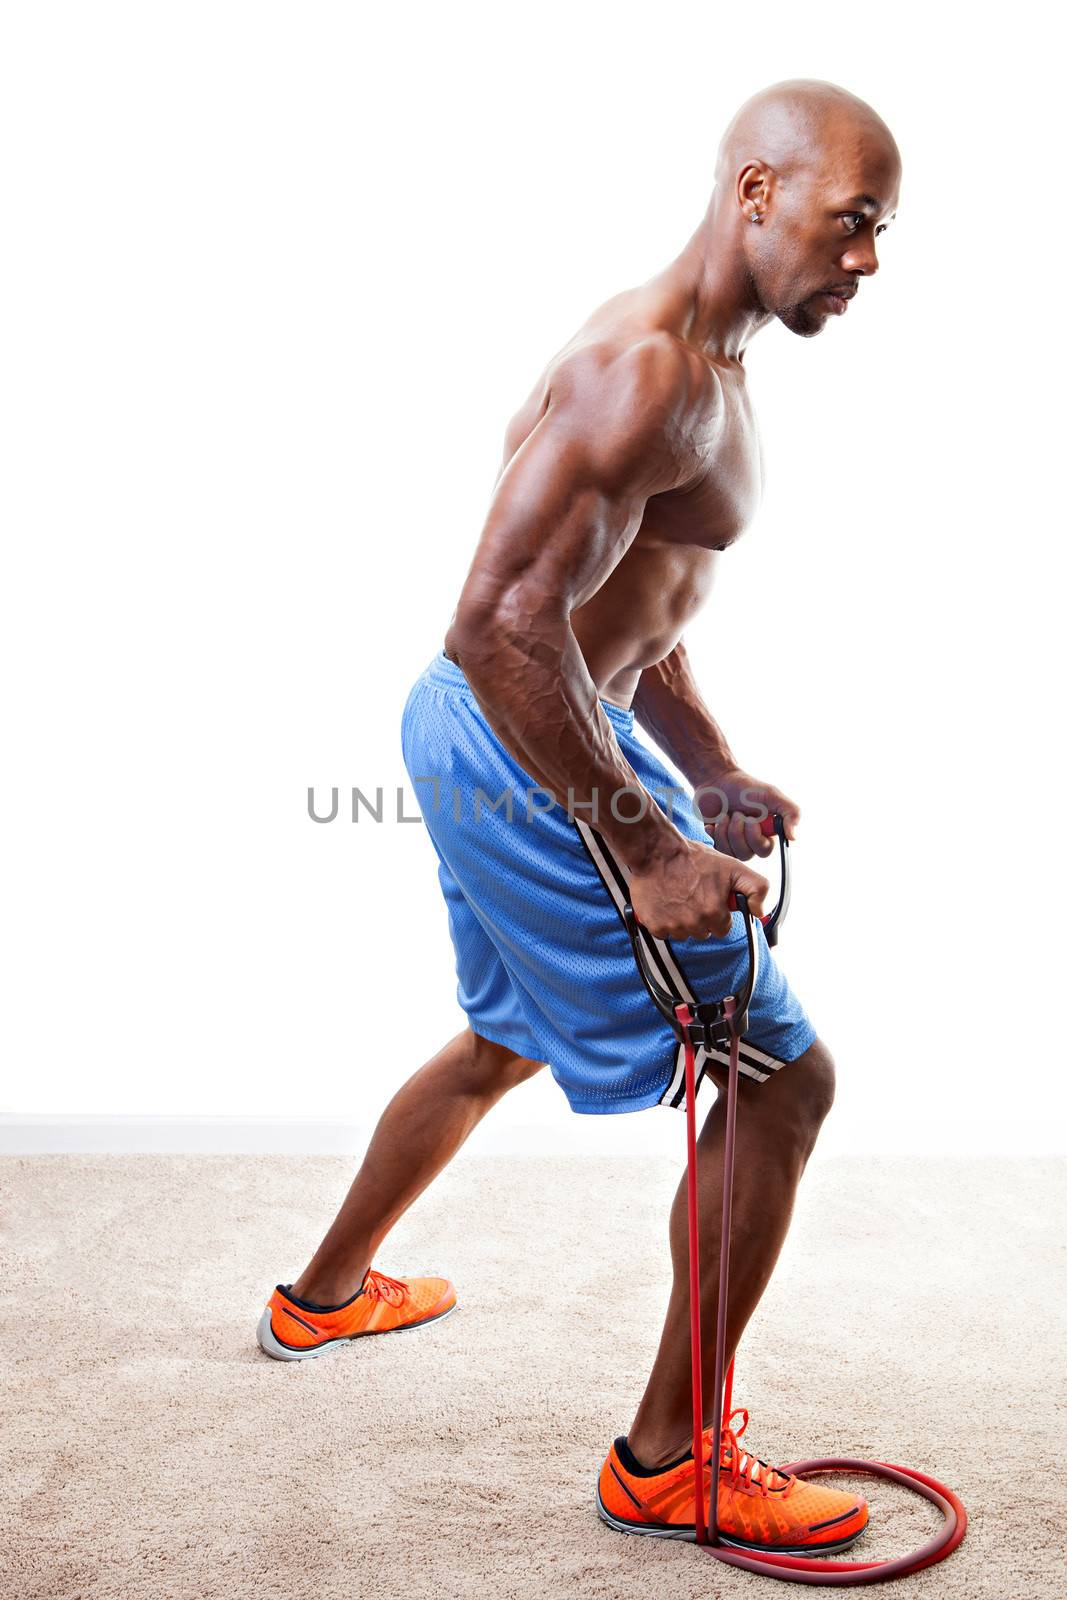 Resistance Band Workout by graficallyminded